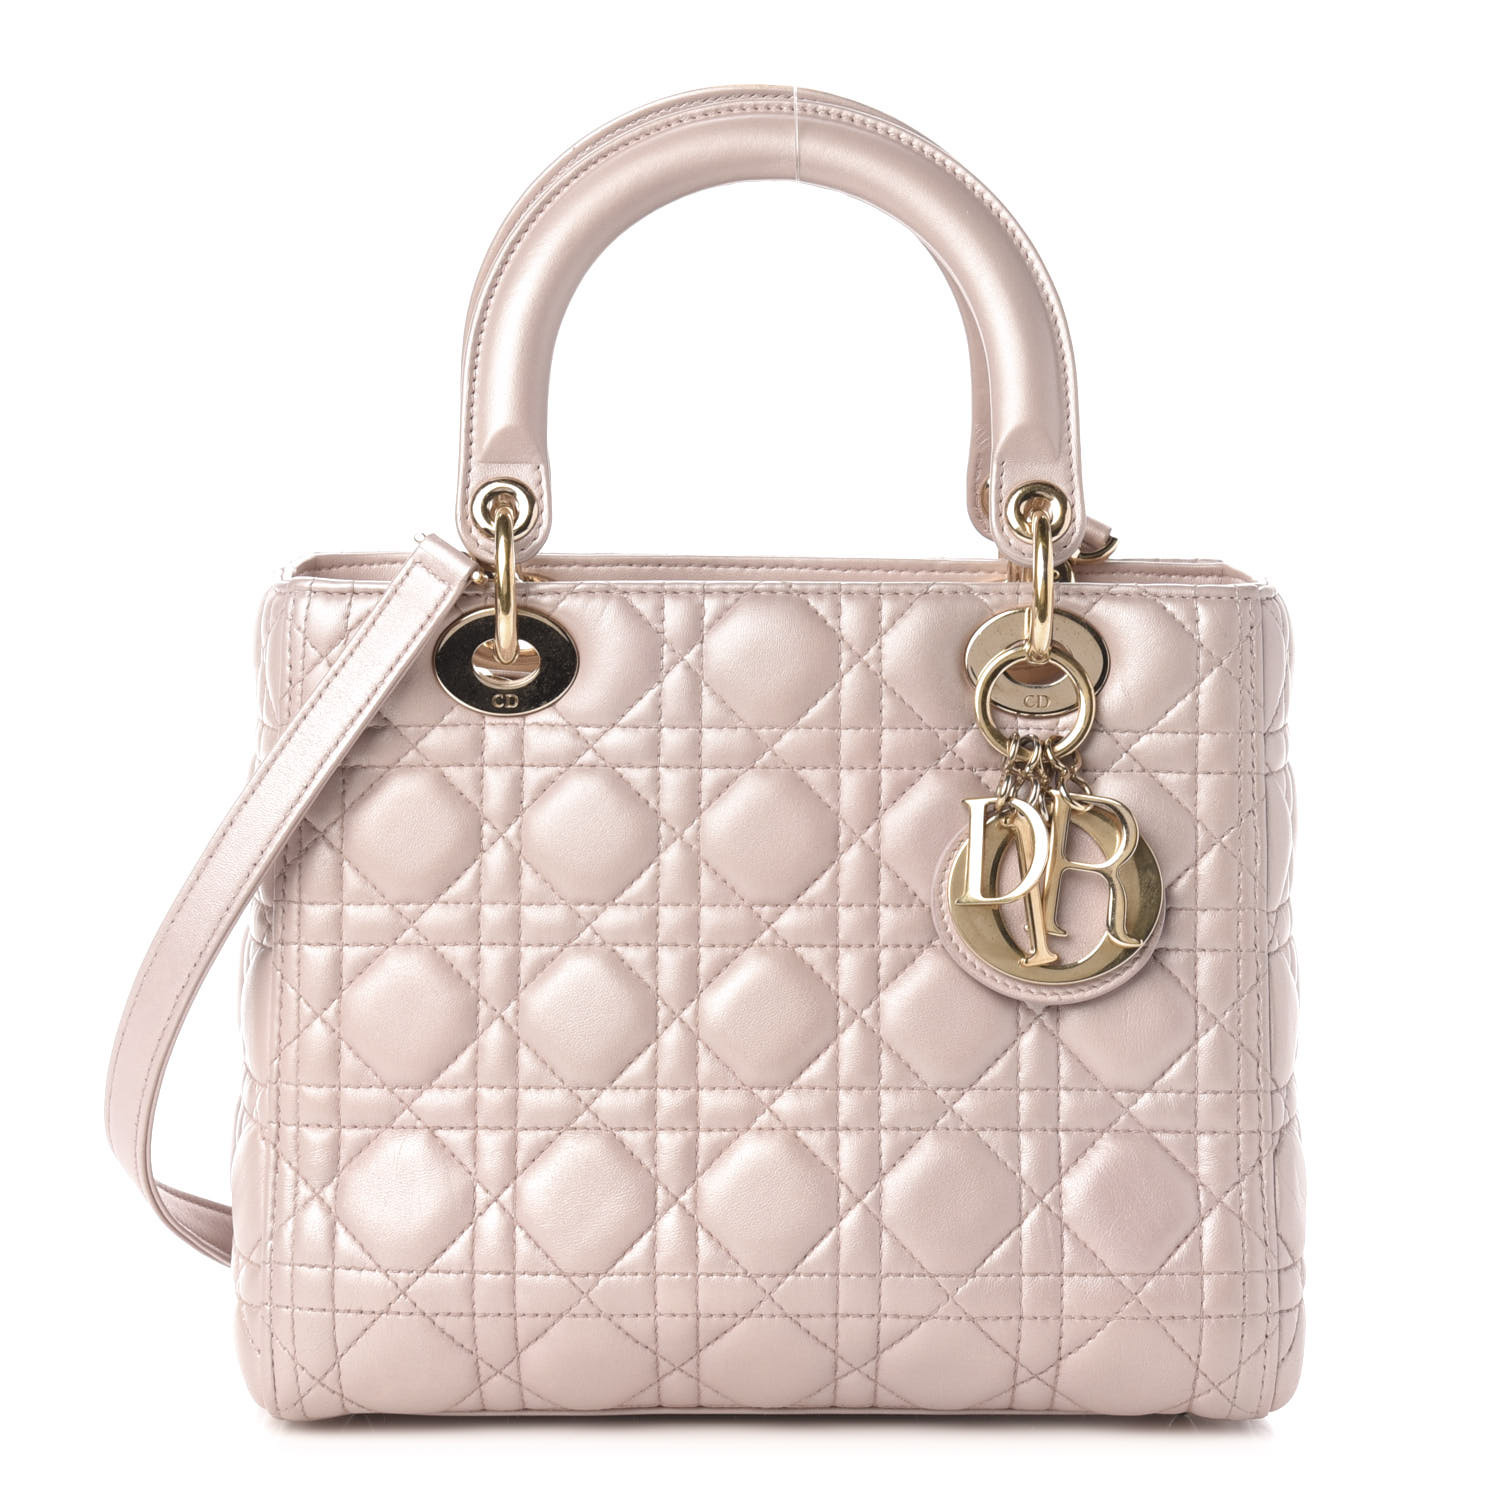 lady dior pearly pink